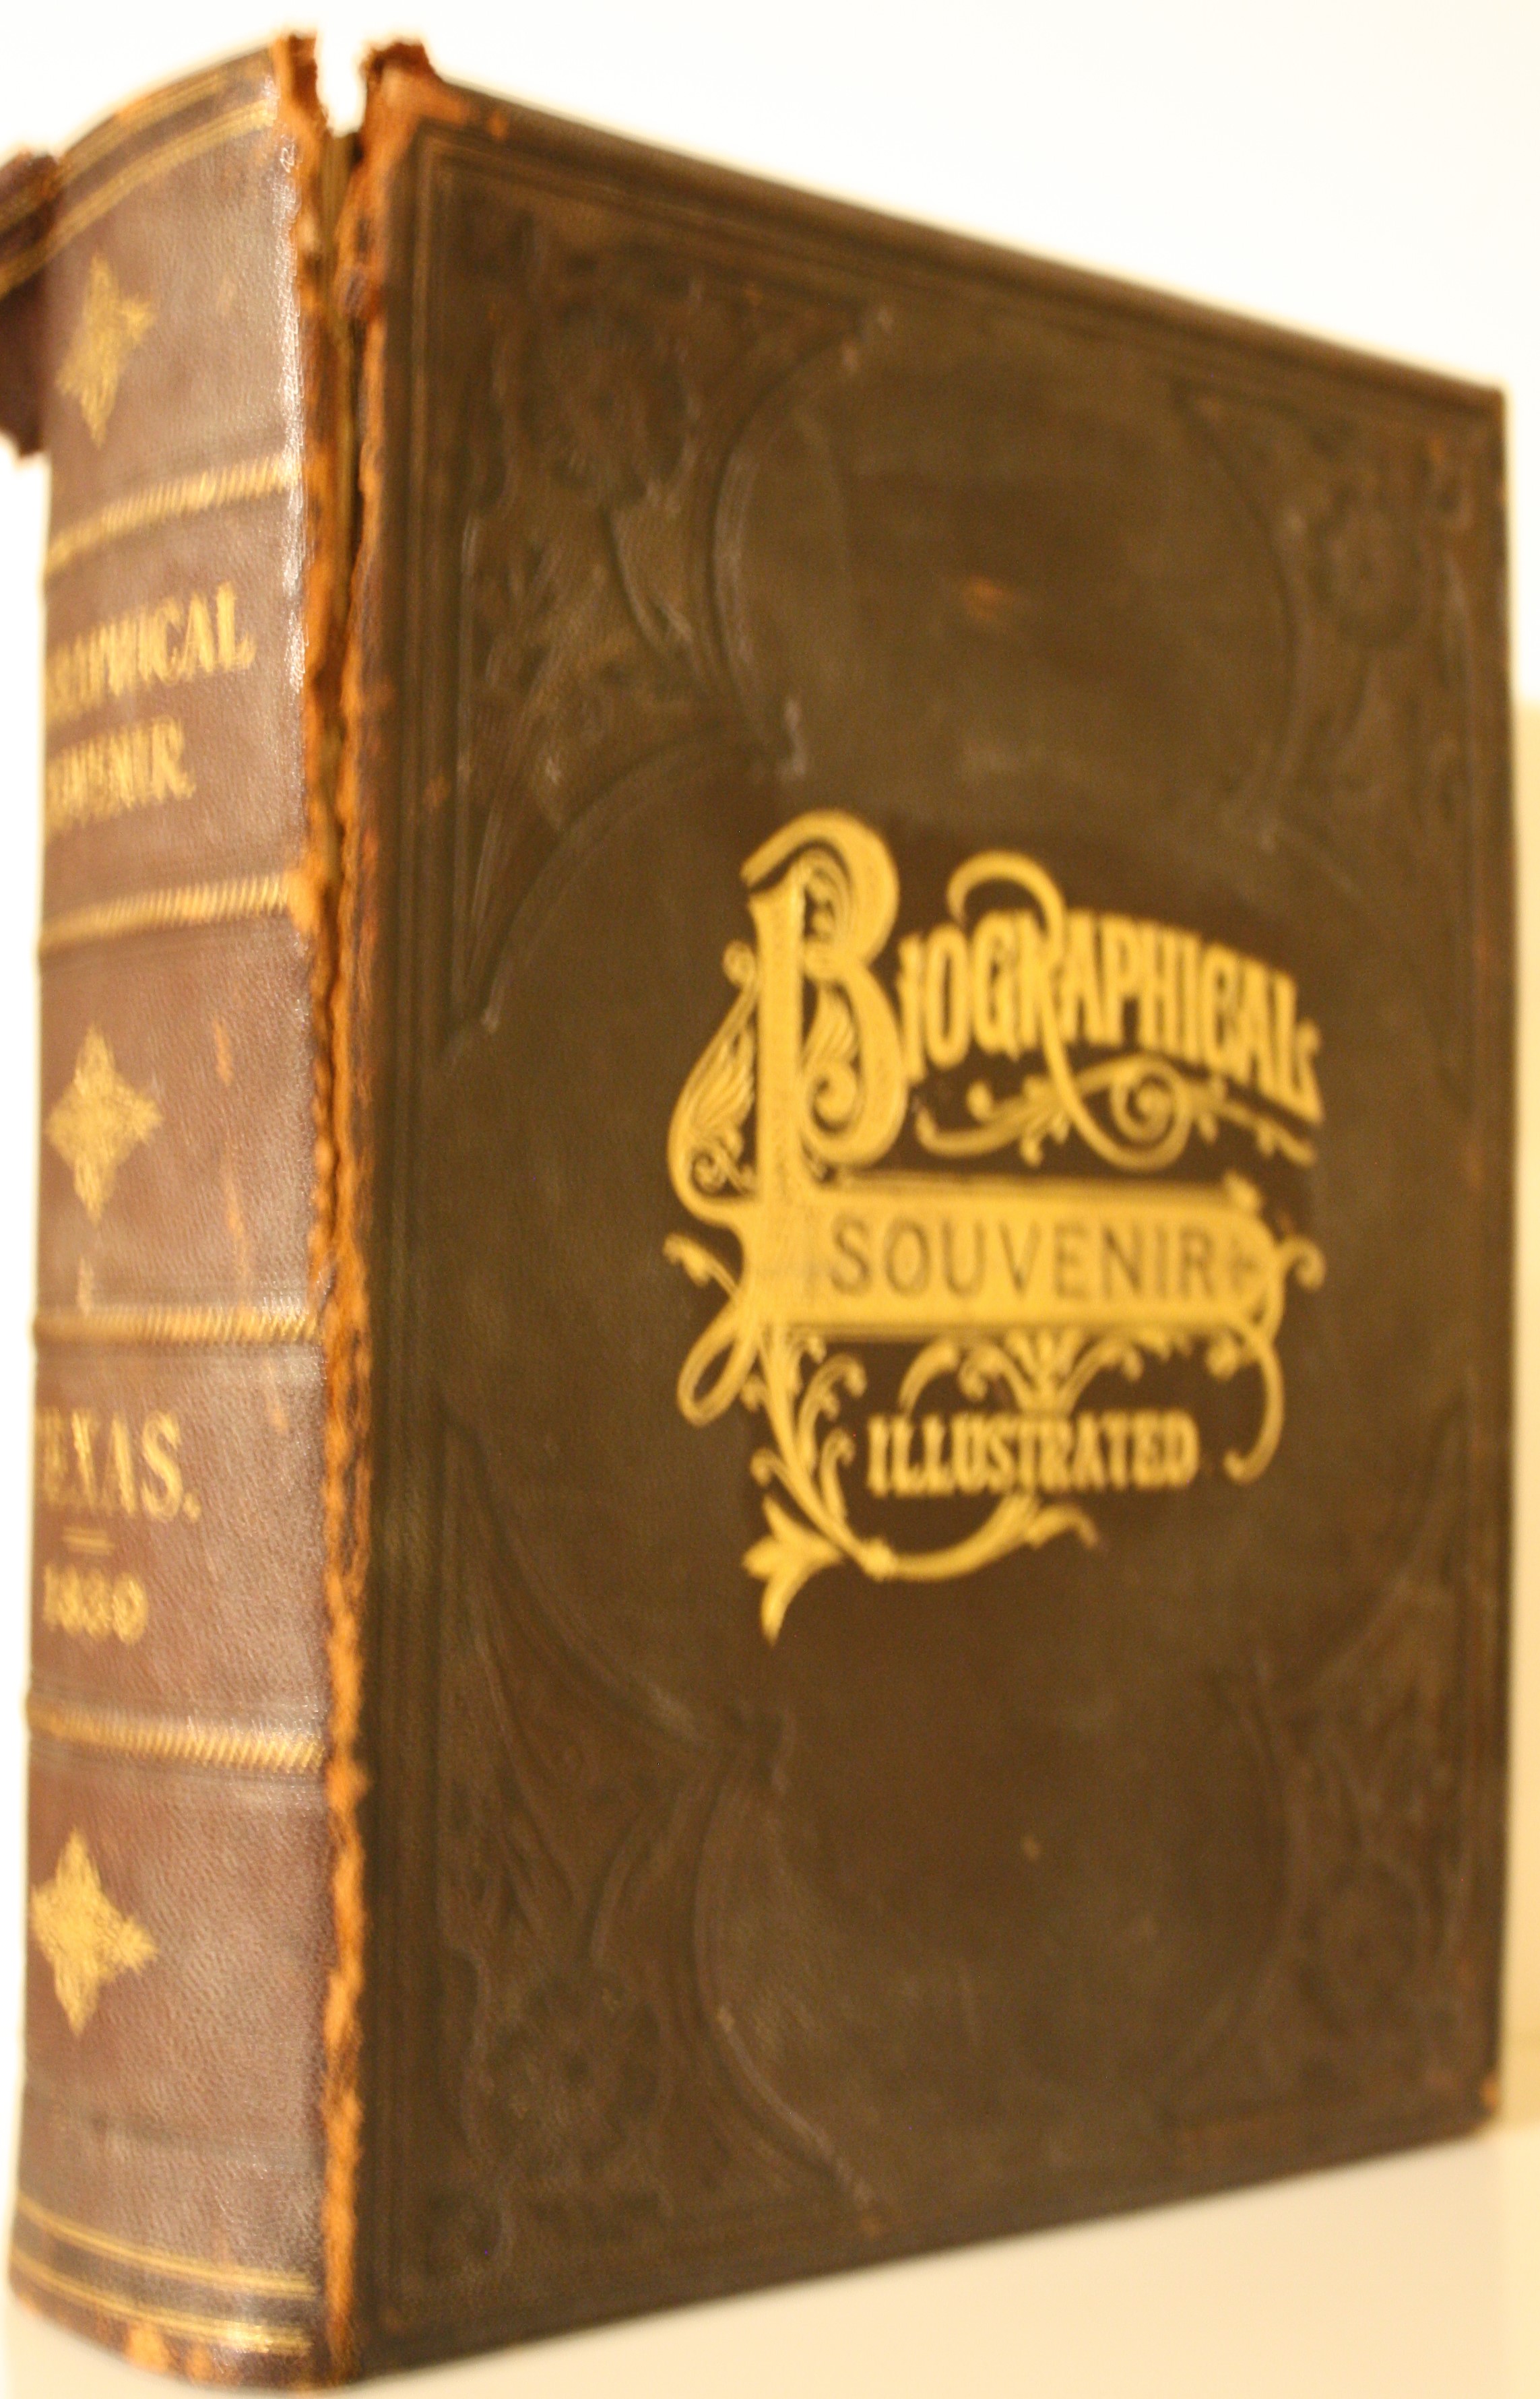 Image for Biographical Souvenir of the State of Texas Containing Biographical Sketches of the Representative Public and Many Early Settled Families